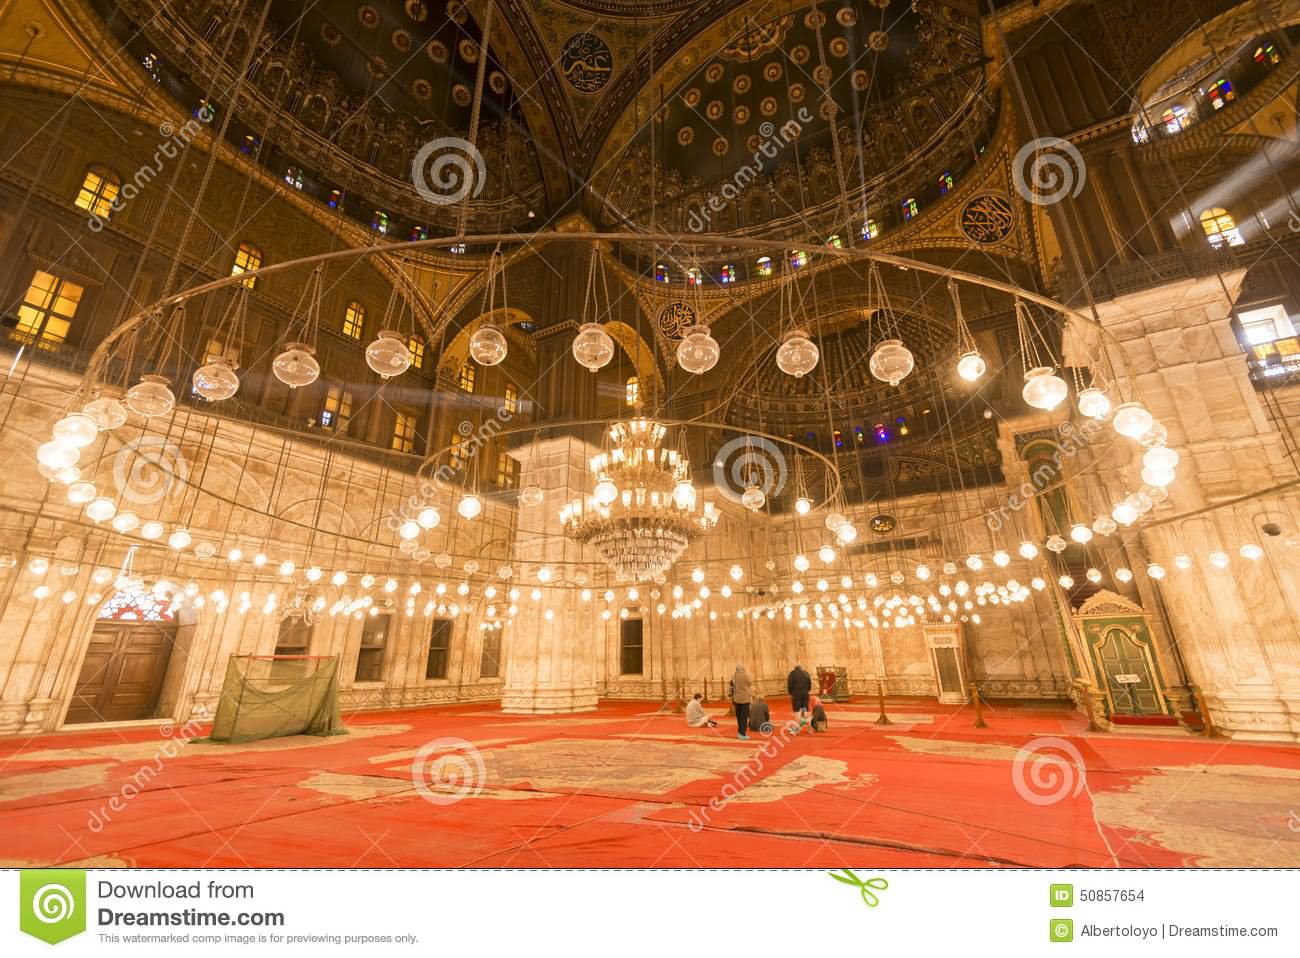 Adorable Interior View Of The Muhammad Ali, Mosque, Cairo, Egypt